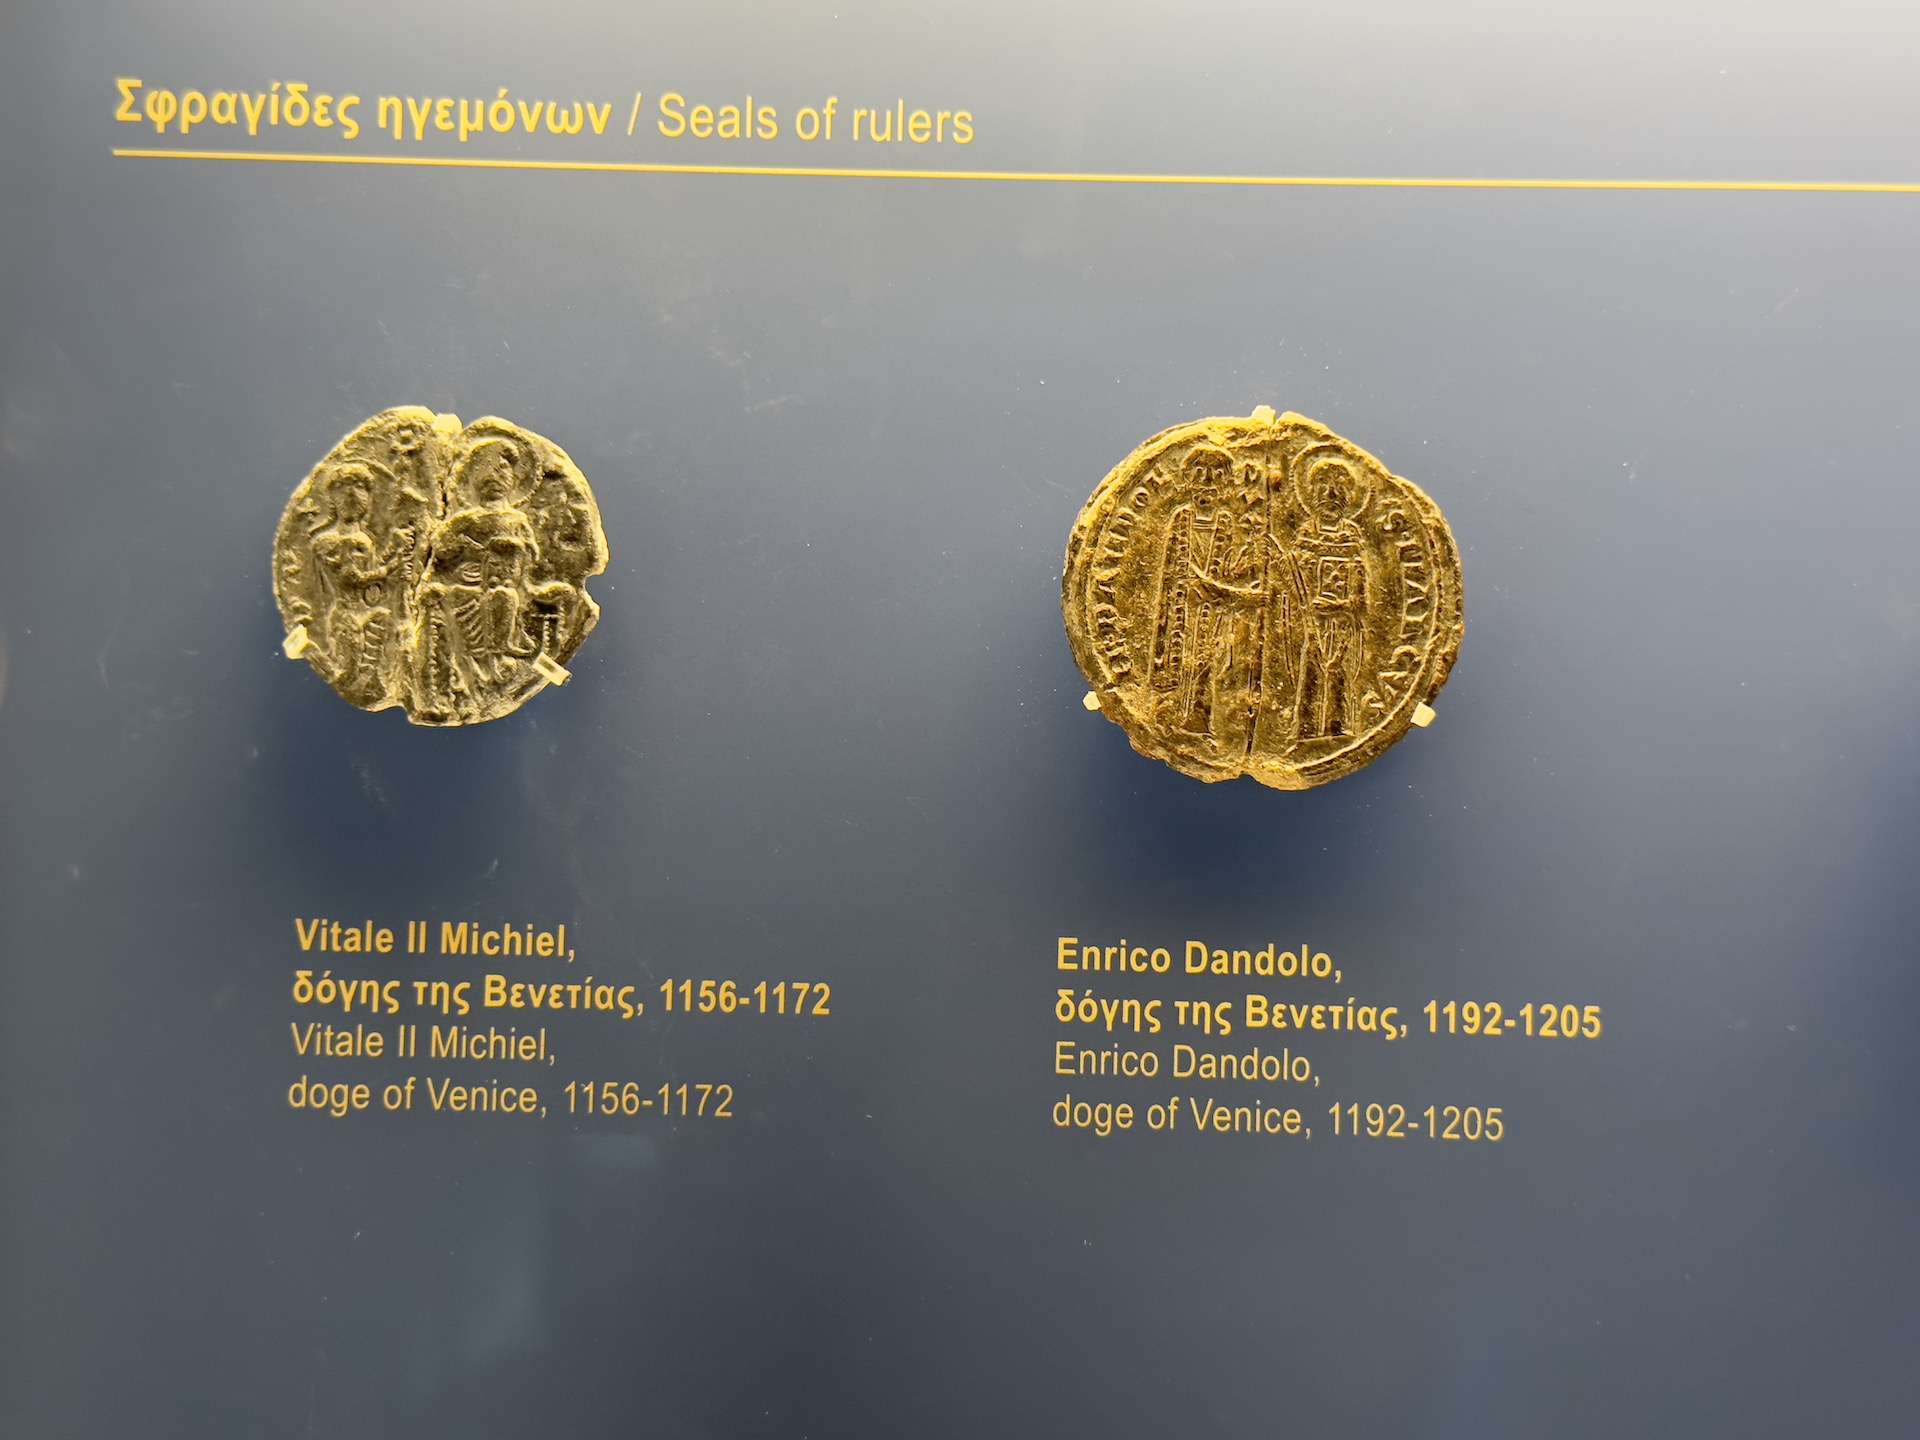 Seals of the Doge of Venice - Vitale II Michiel, 1156-1172 (left) and Enrico Dandolo, 1192-1205 (right) at the Numismatic Museum in Athens, Greece